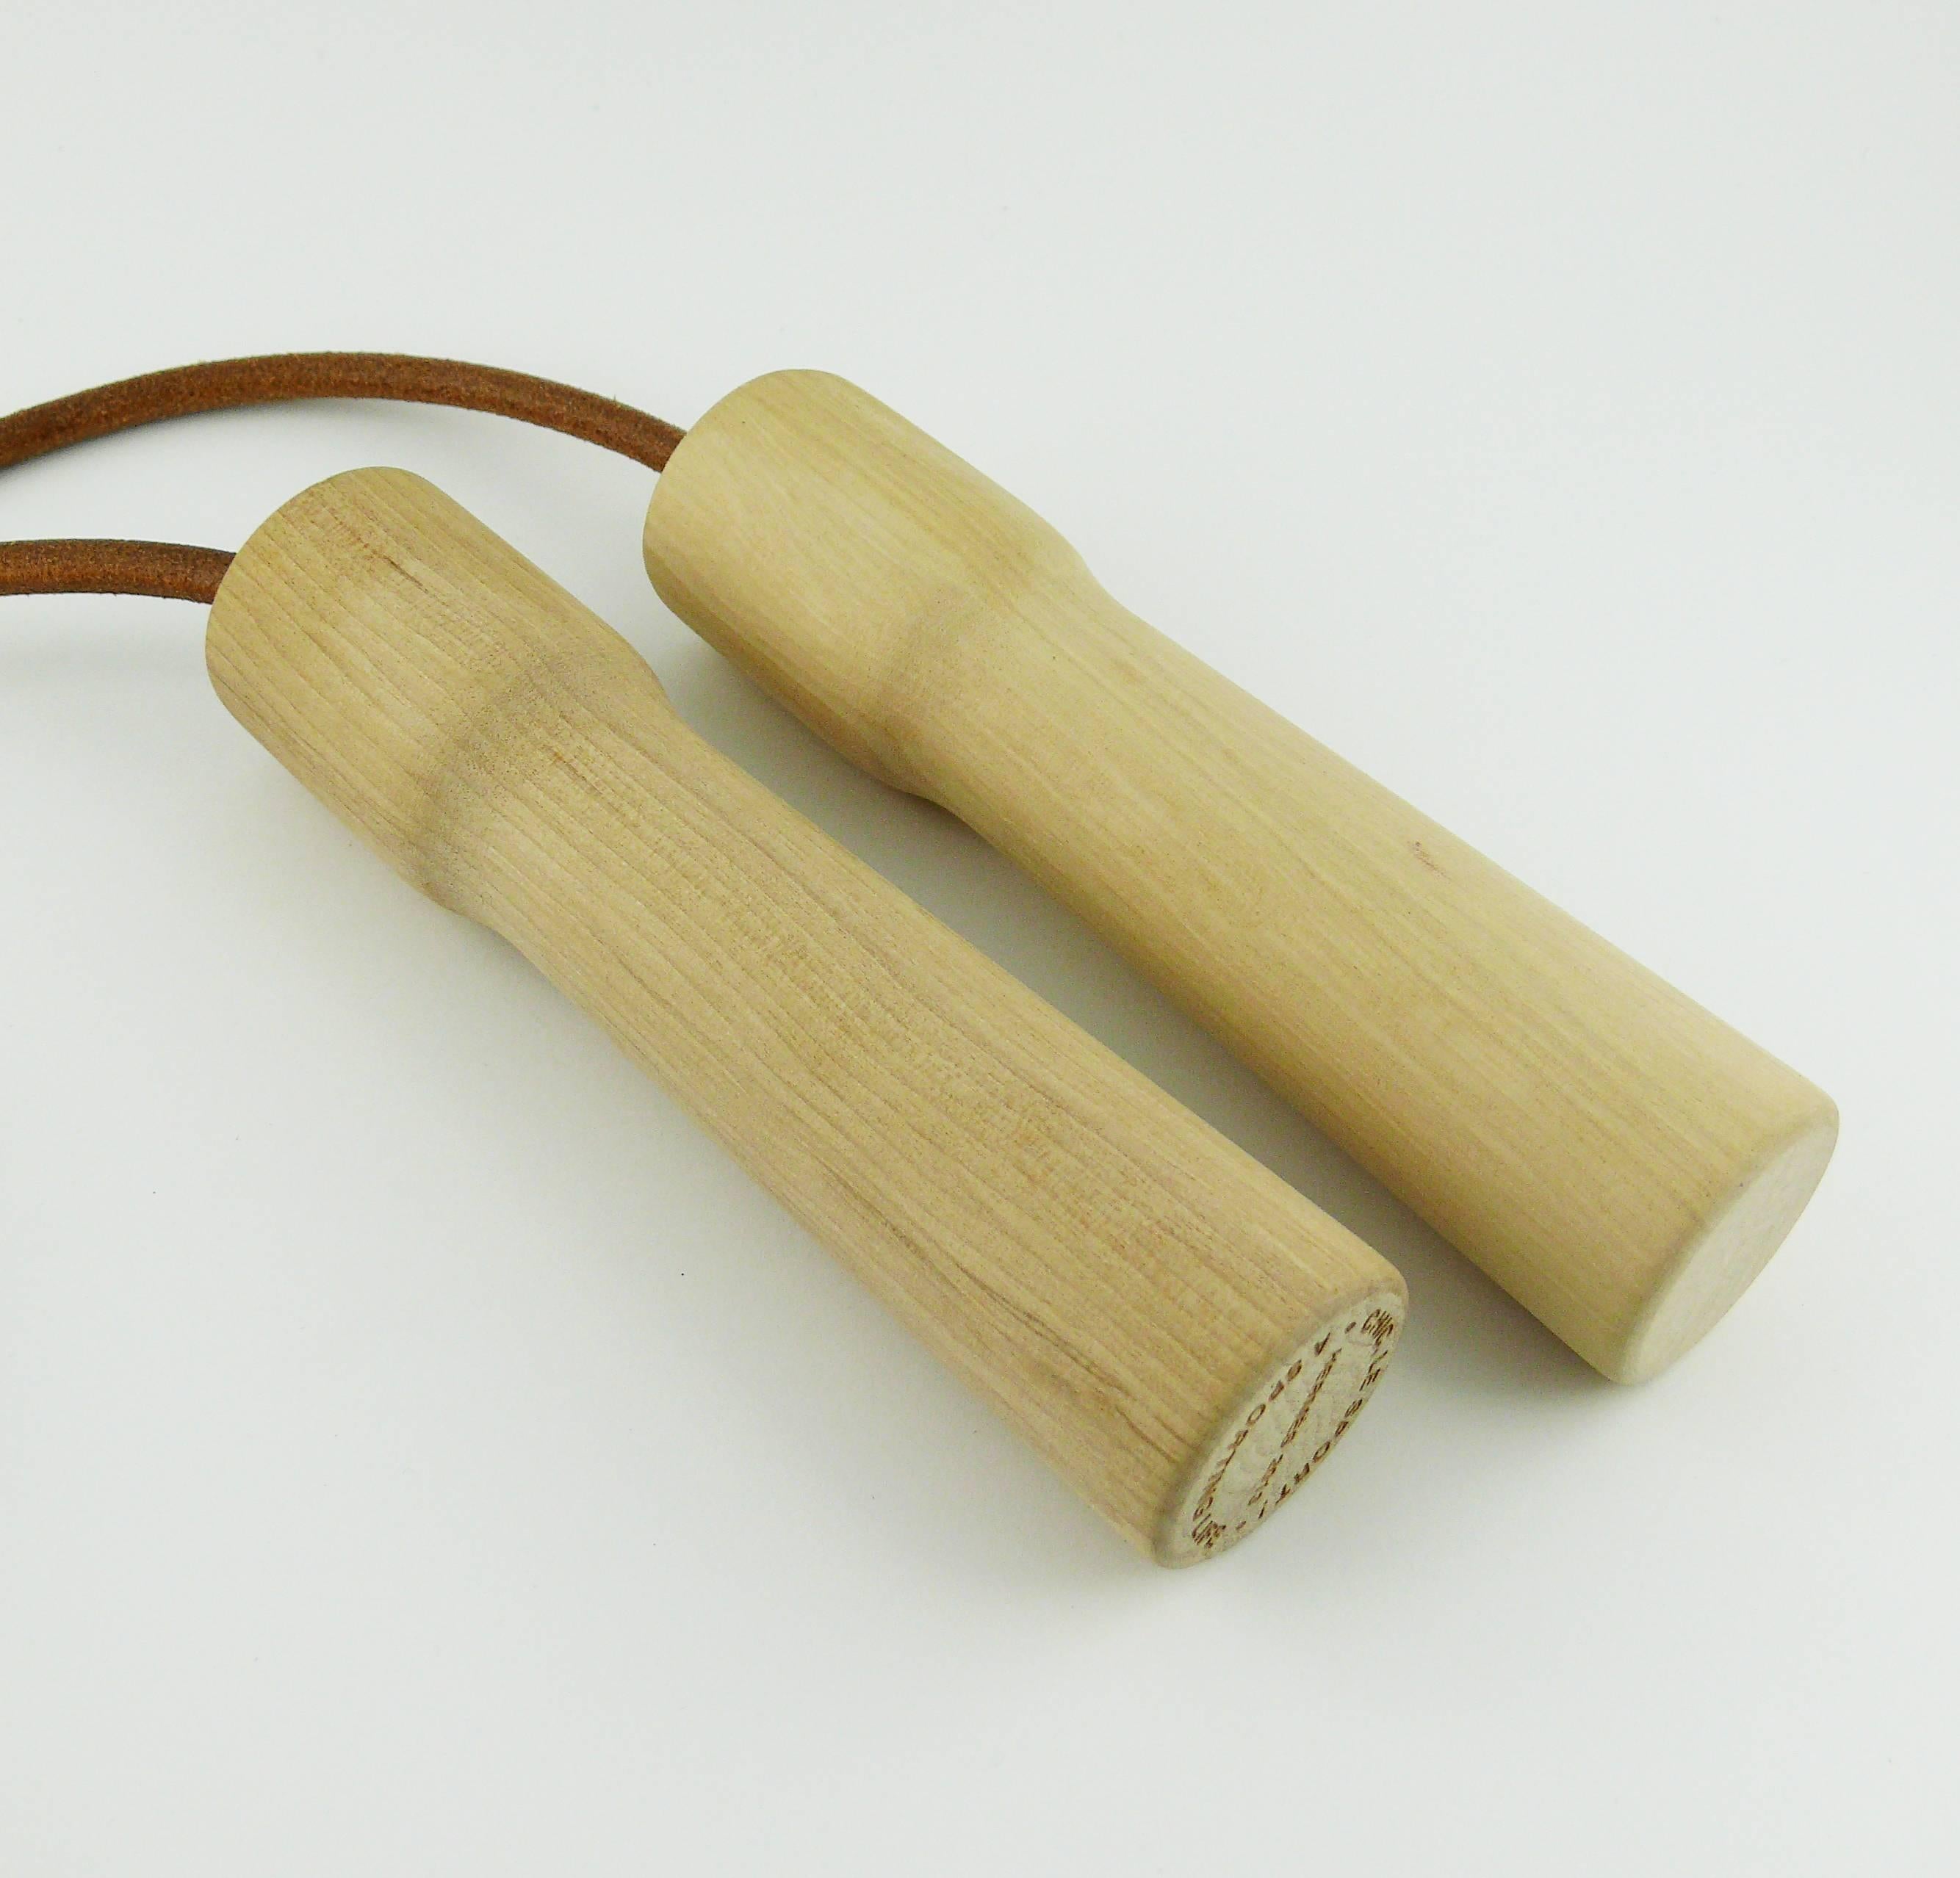 HERMES Paris uber rare wood handle and leather jumping rope.

Limited Edition.

Marked HERMES 2013 Made in France.
Embossed Chic, le sport ! A sporting life.

Comes with a dust bag (stained).

NOTES
- This is a preloved vintage item, therefore it